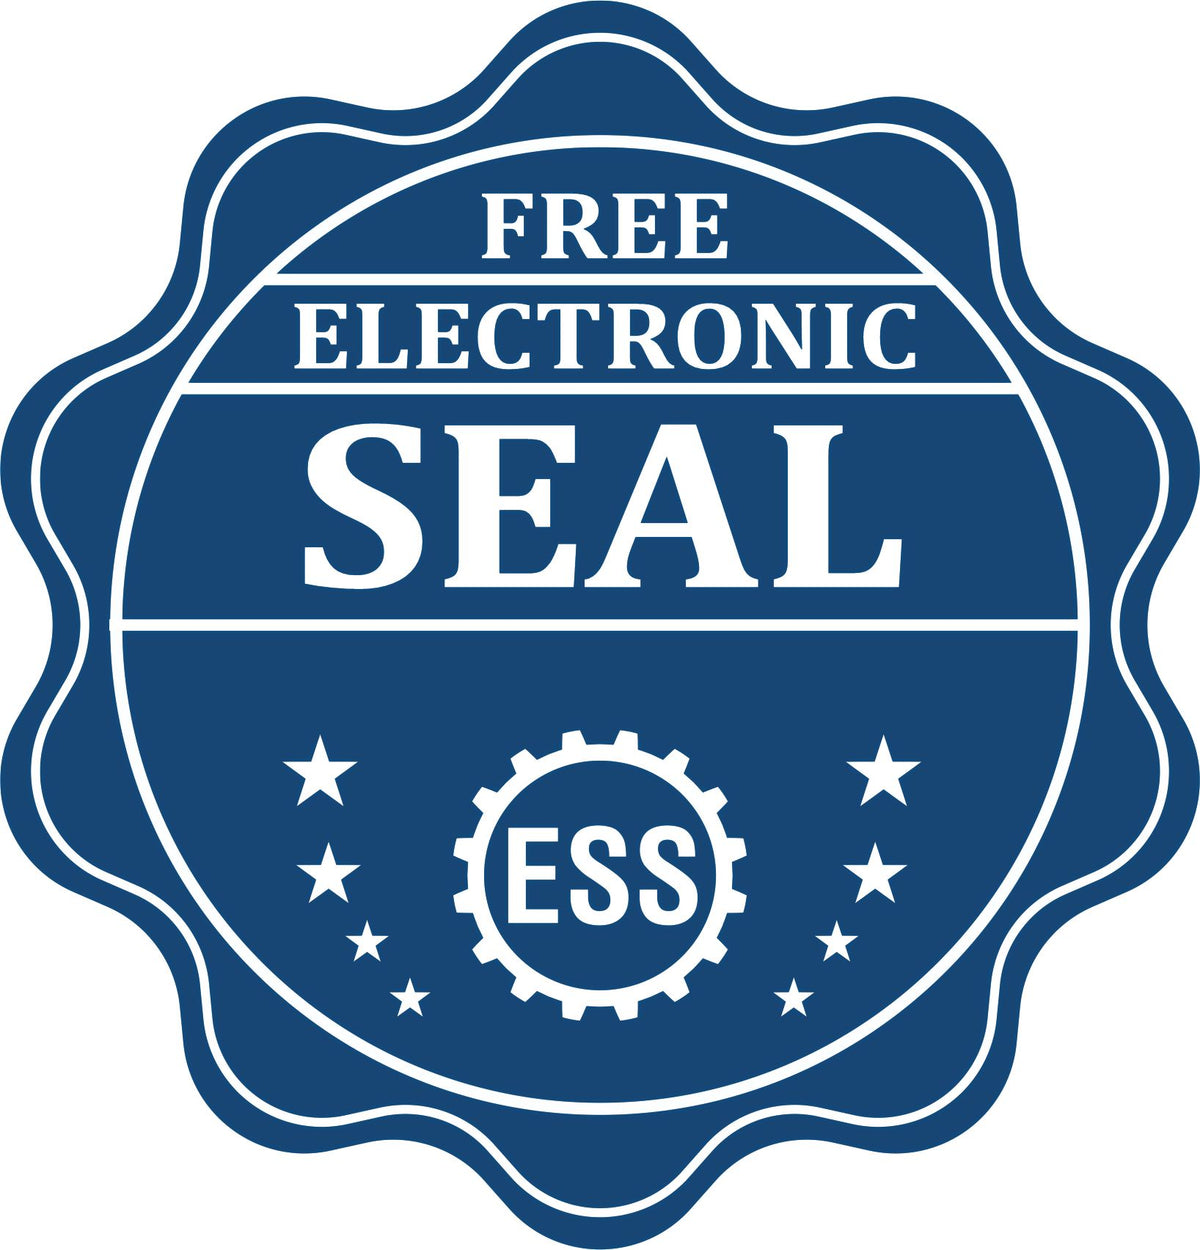 A badge showing a free electronic seal for the Hybrid Nevada Geologist Seal with stars and the ESS gear on the emblem.